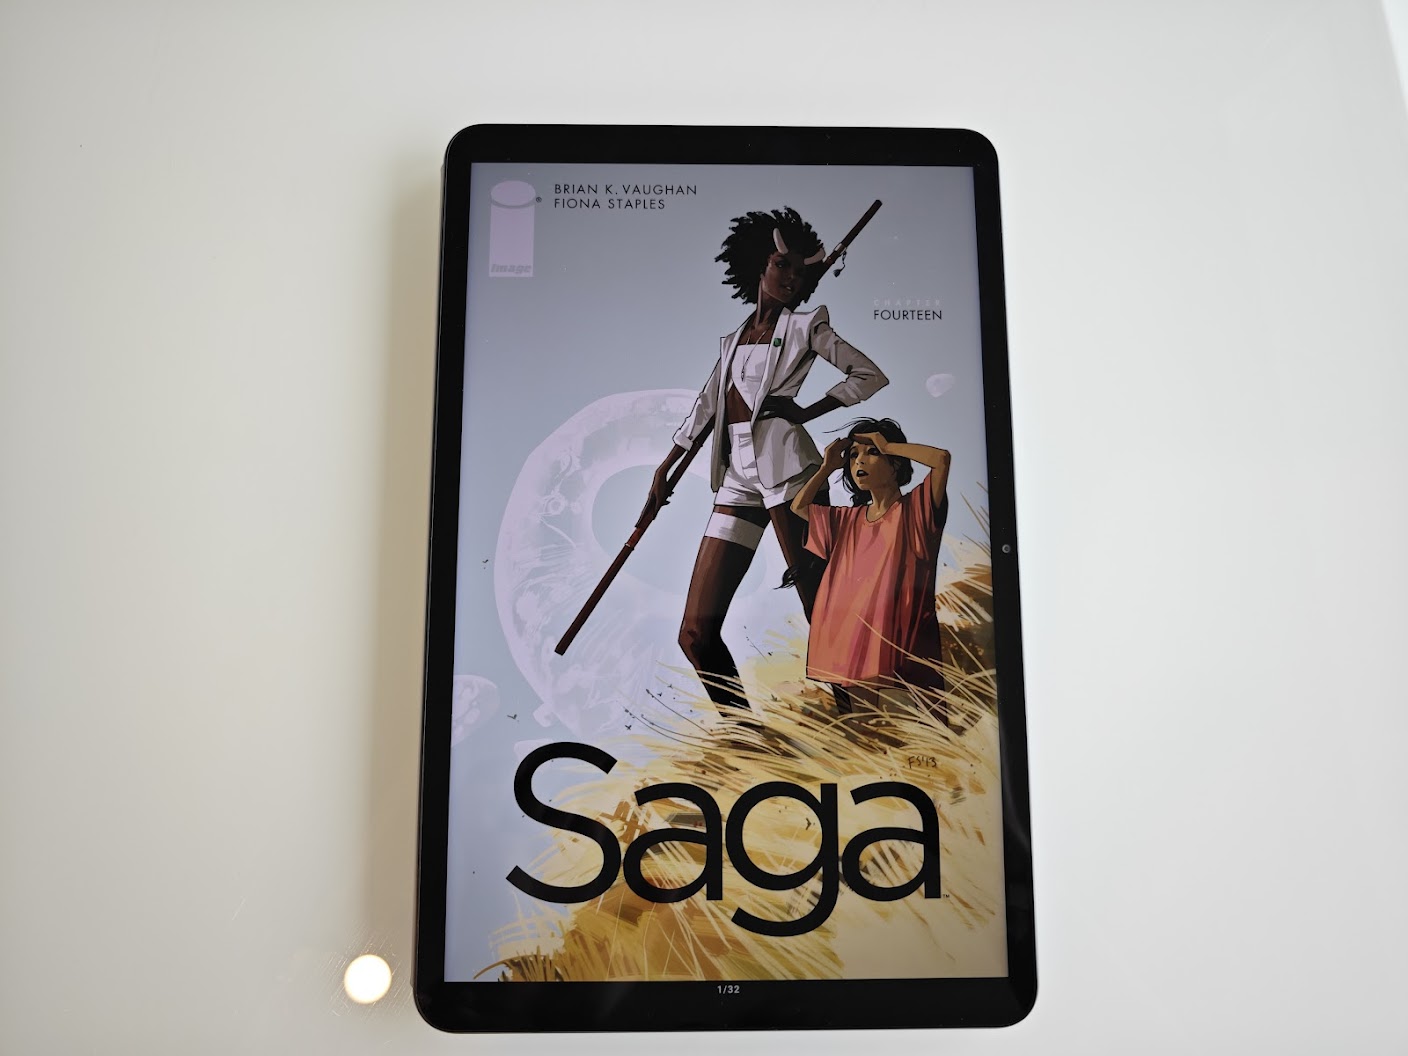 Xiaomi Pad 6 Full Review: Worth the Hype!? 